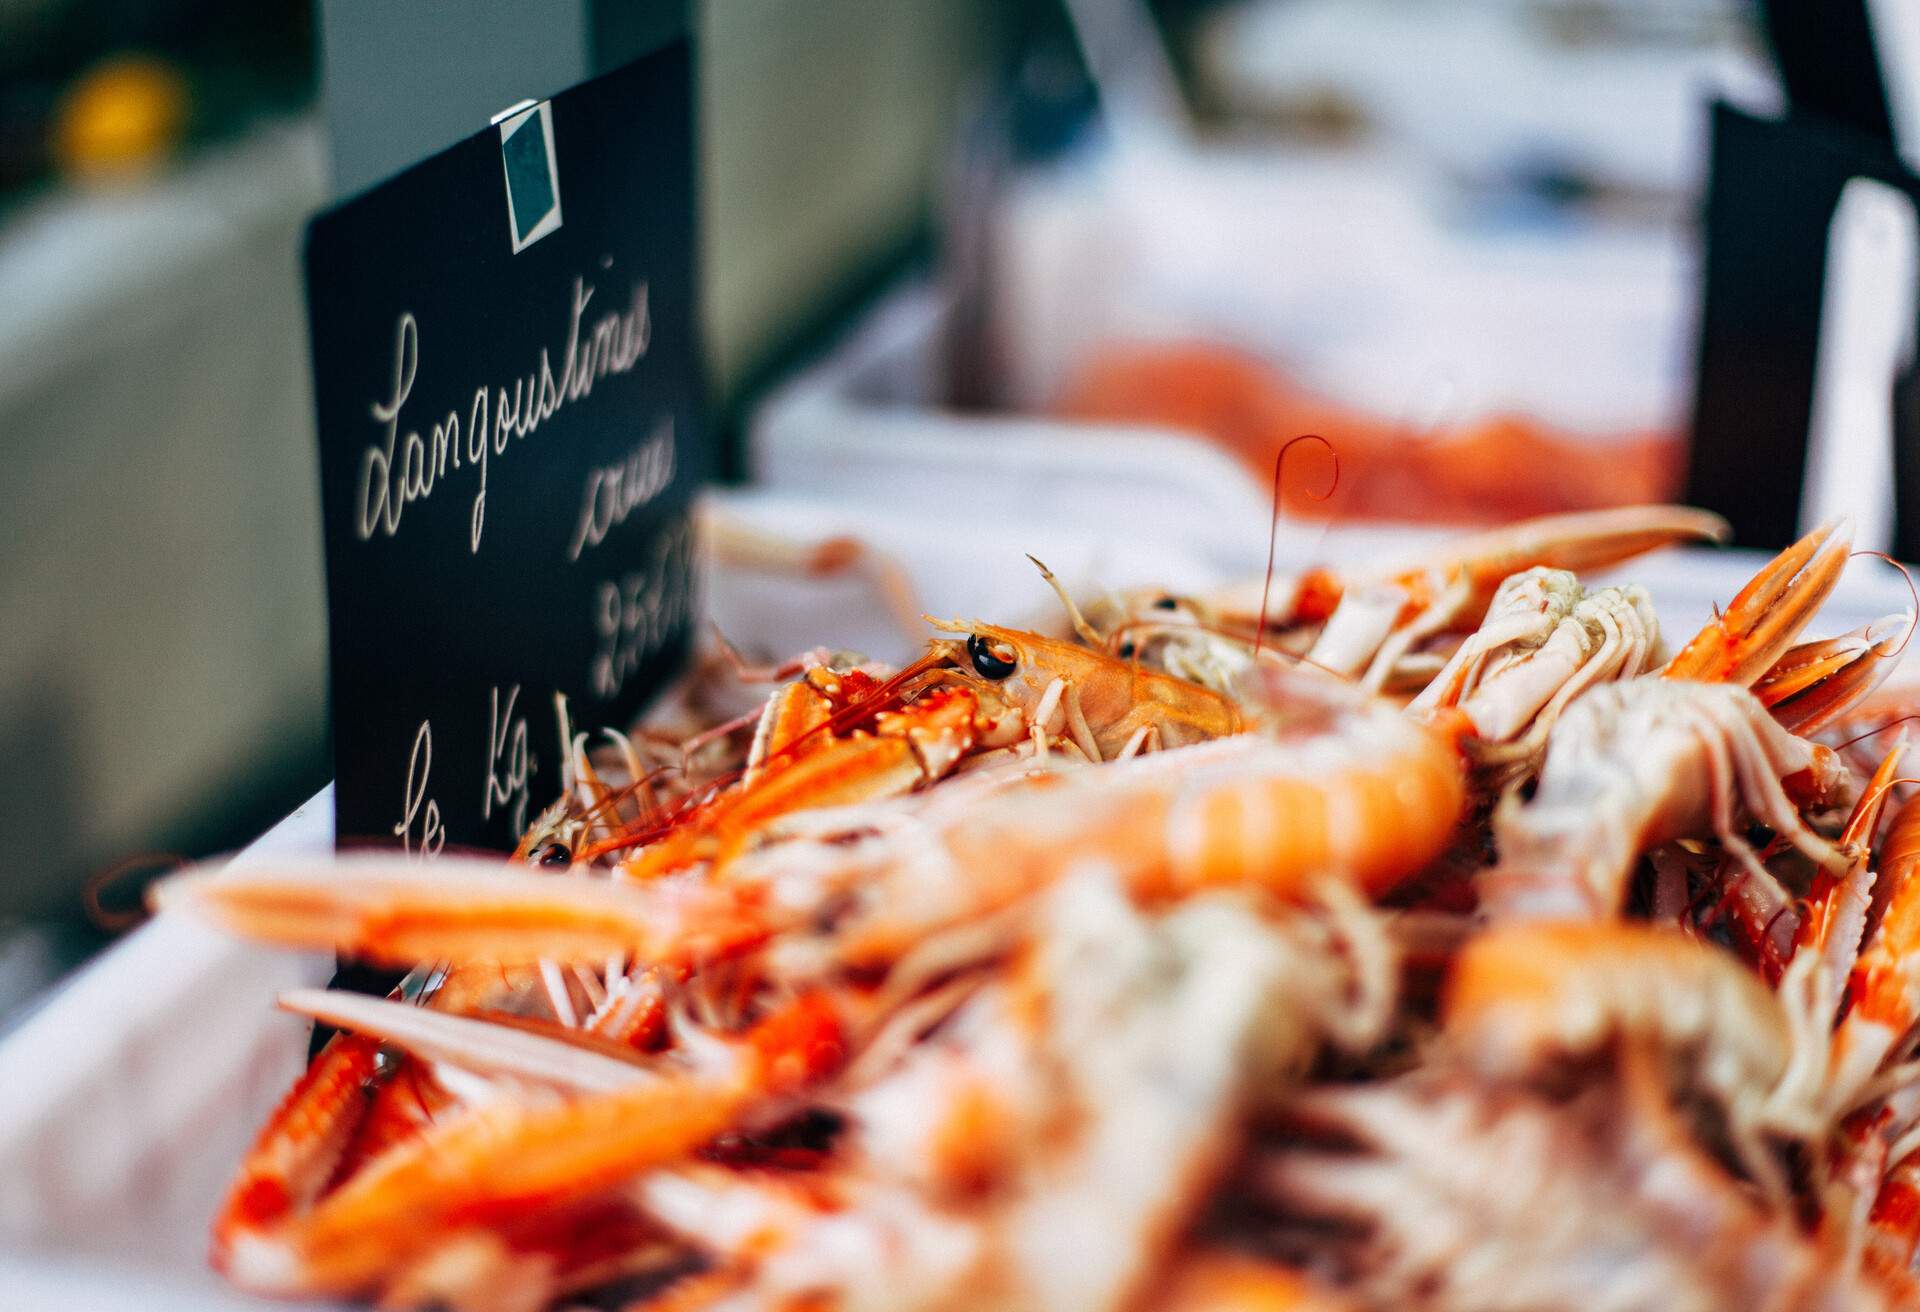 A pile of cooked Langoustine with a sign at a street market